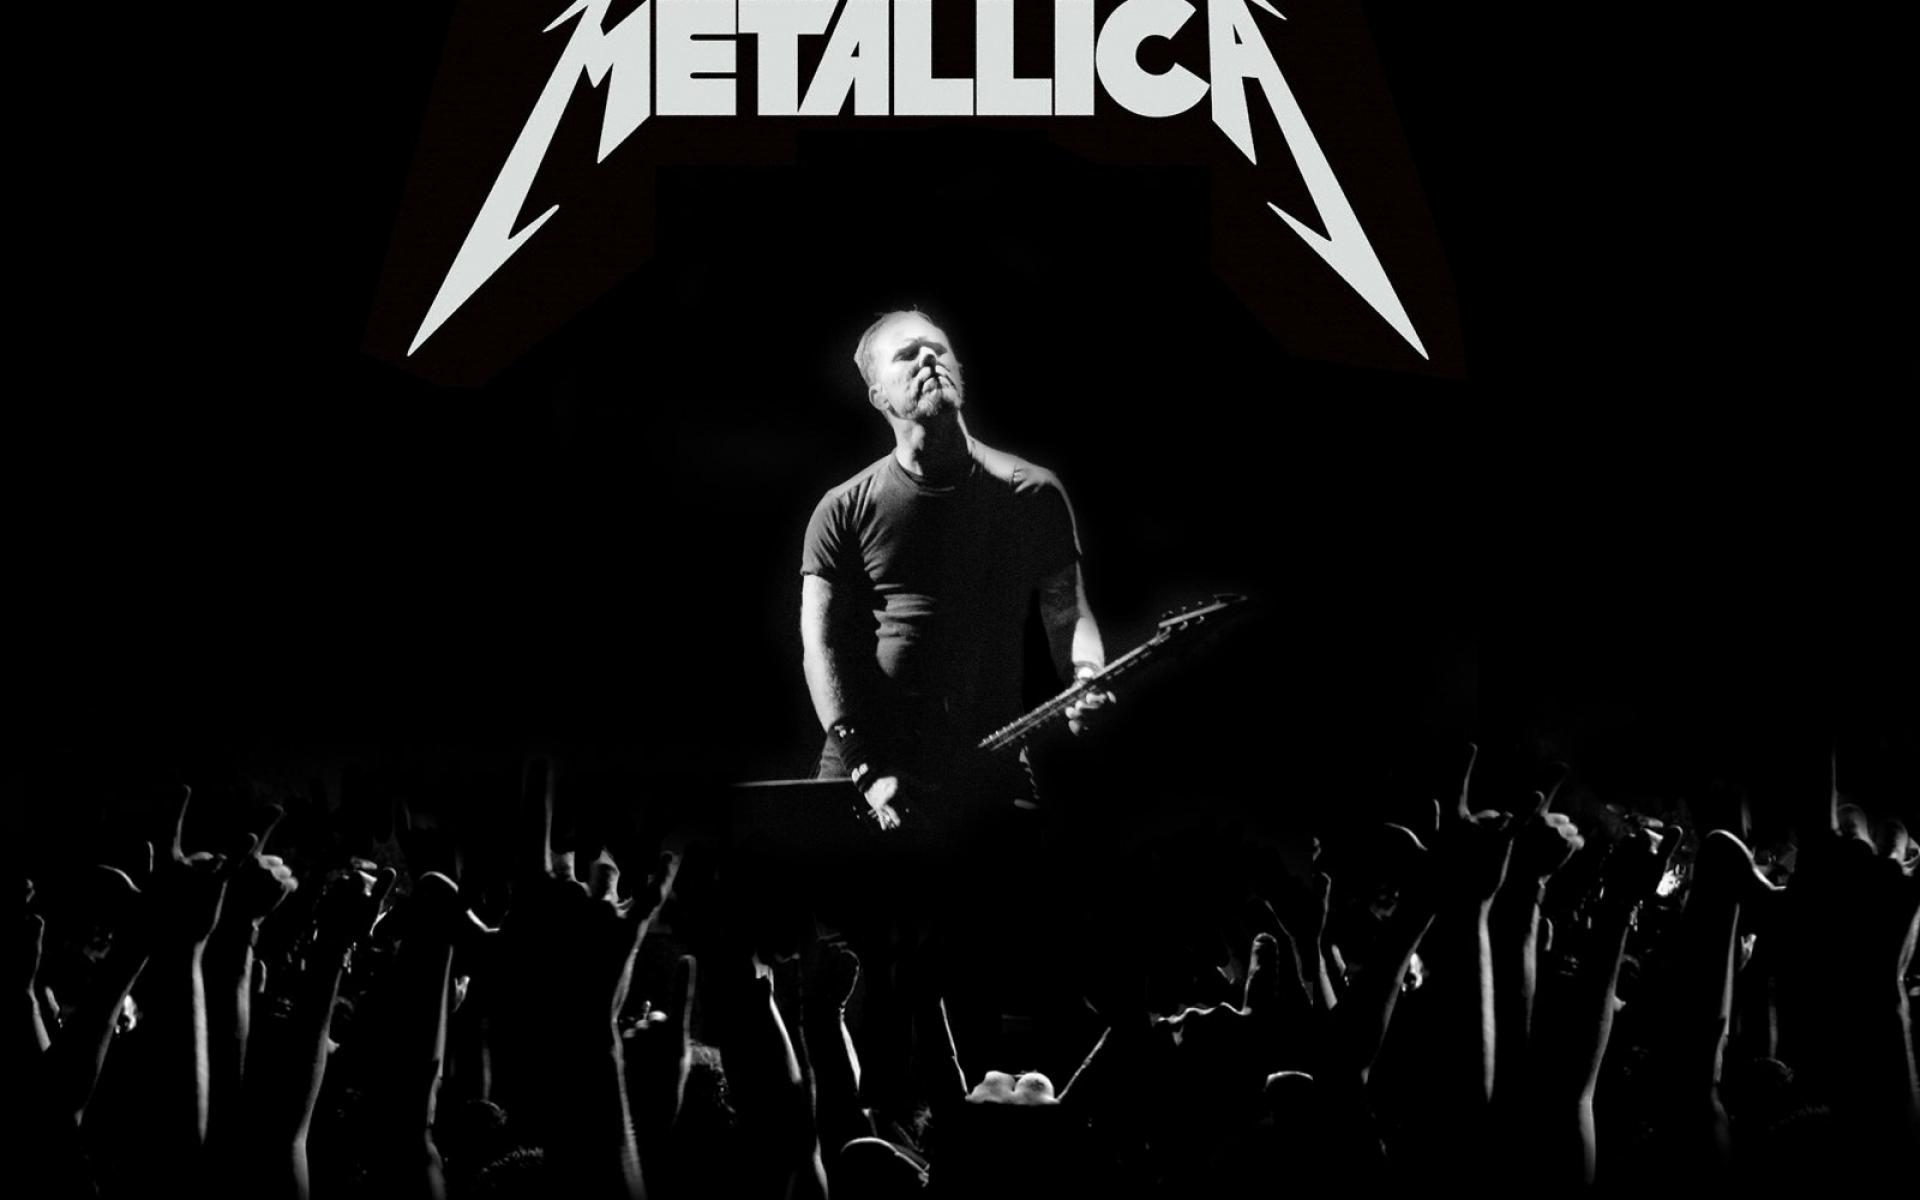 Metallica Wallpaper High Quality And Resolution